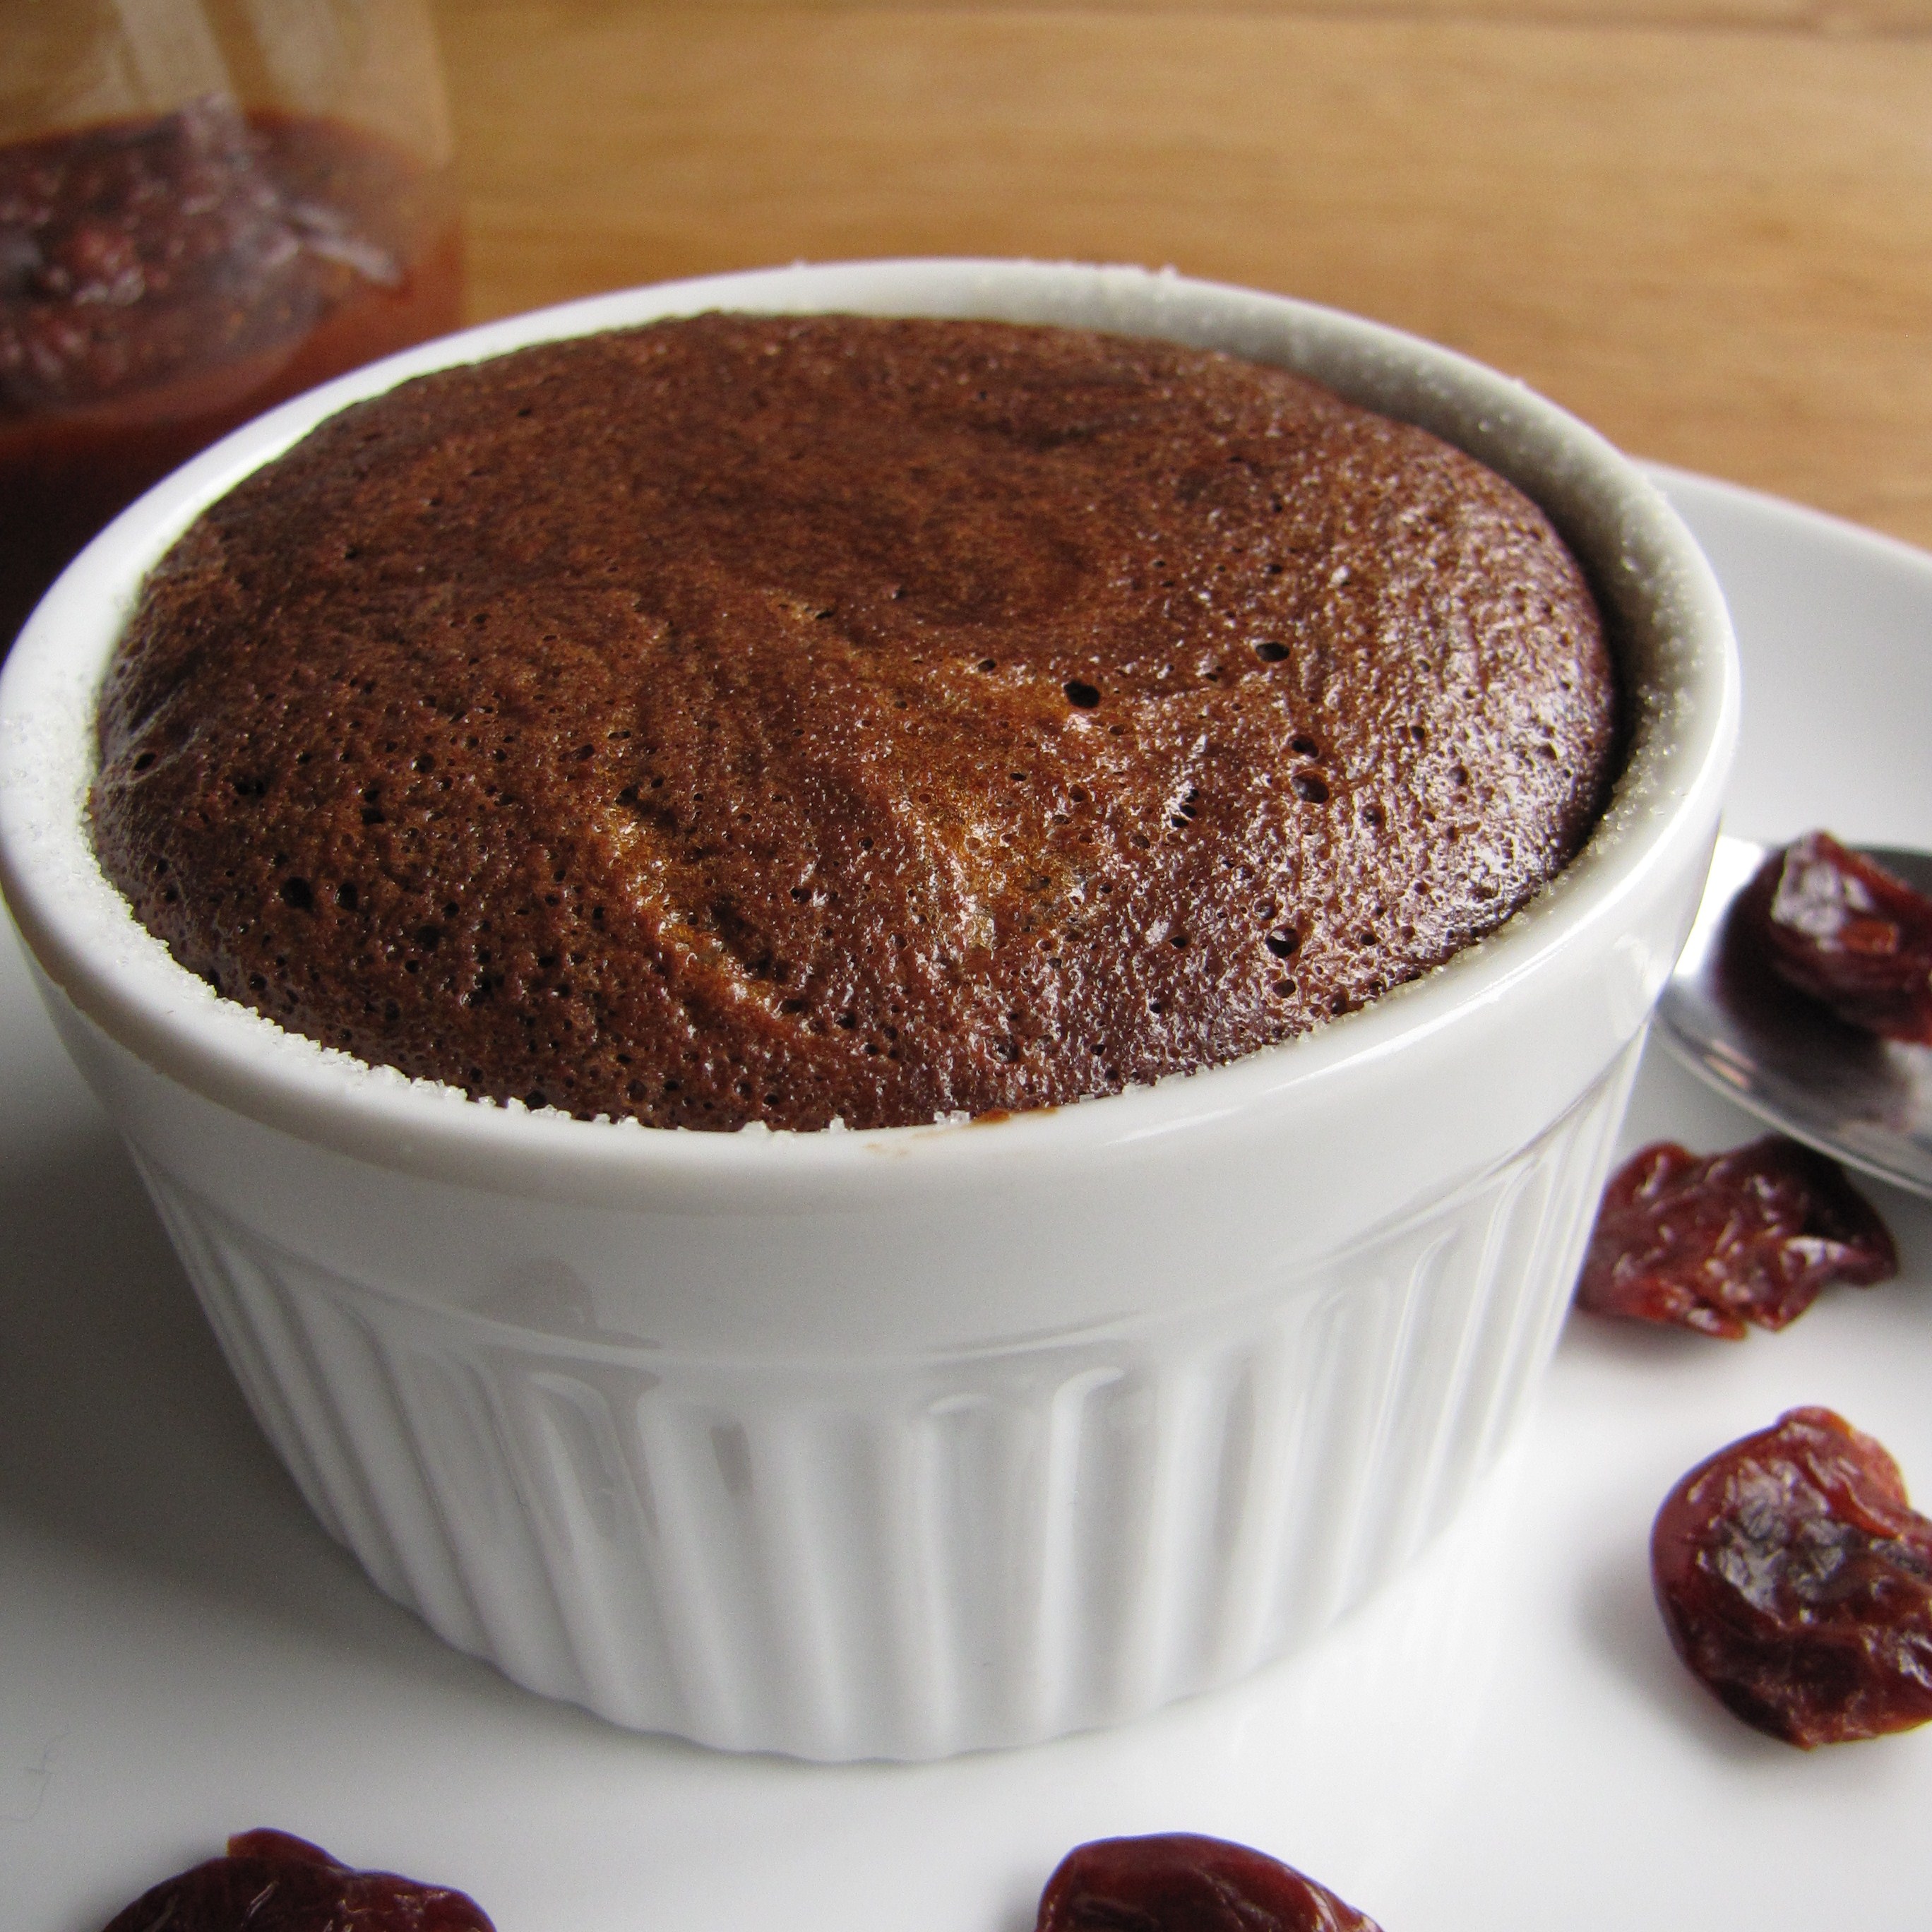 RD #3 – Spicy Cherry-Chocolate Souffles